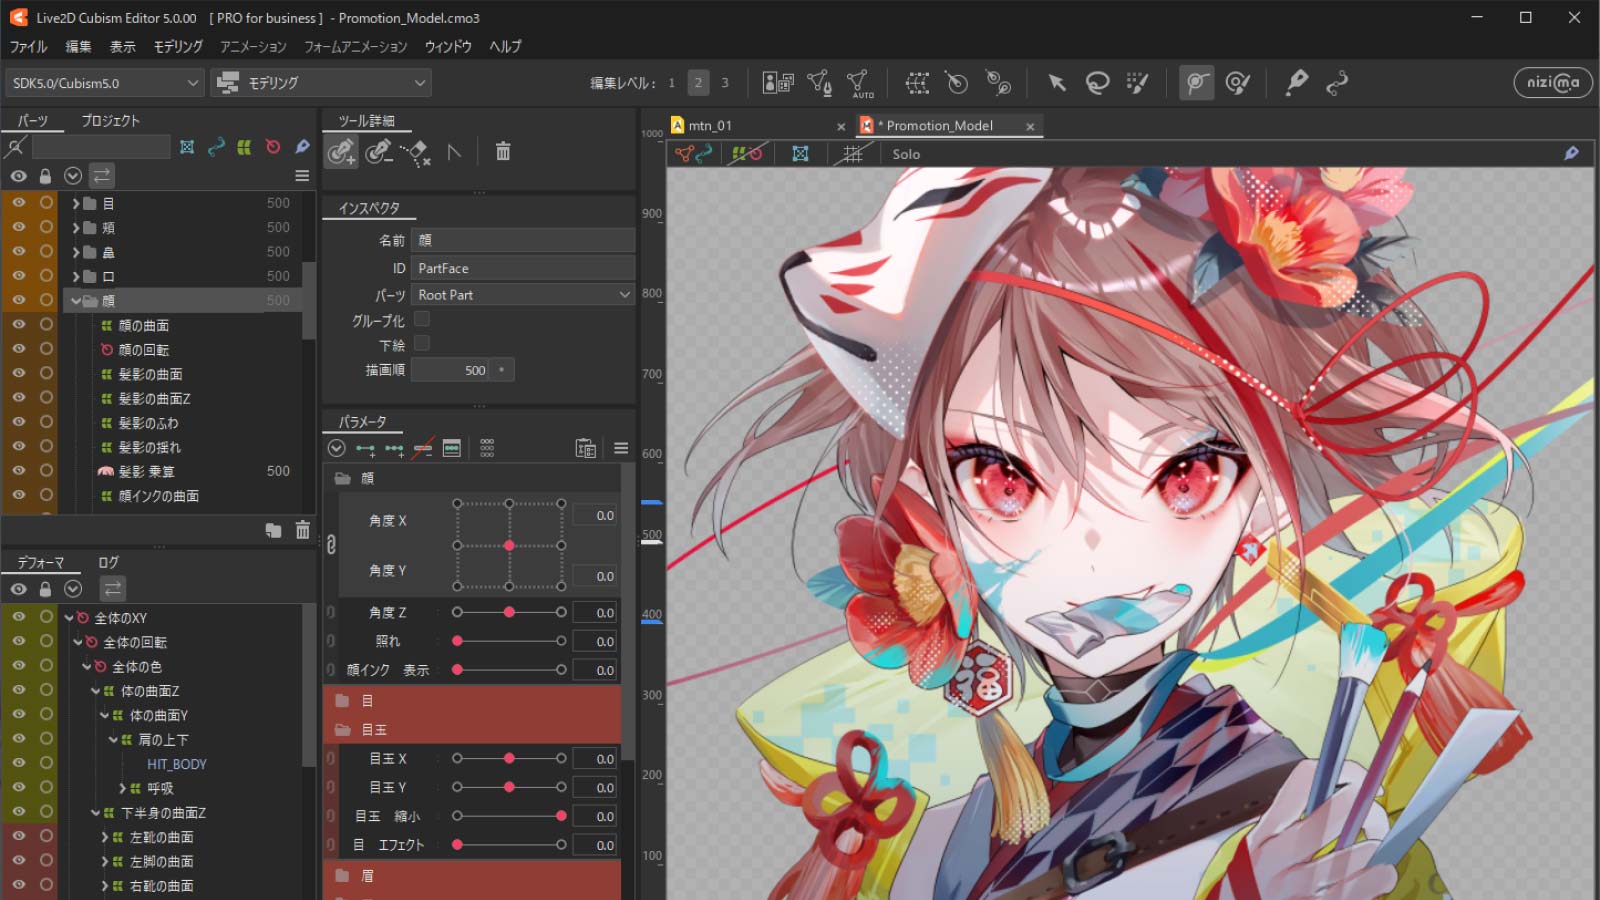 Live2D Cubism Editor 5.0.00 System Requirements